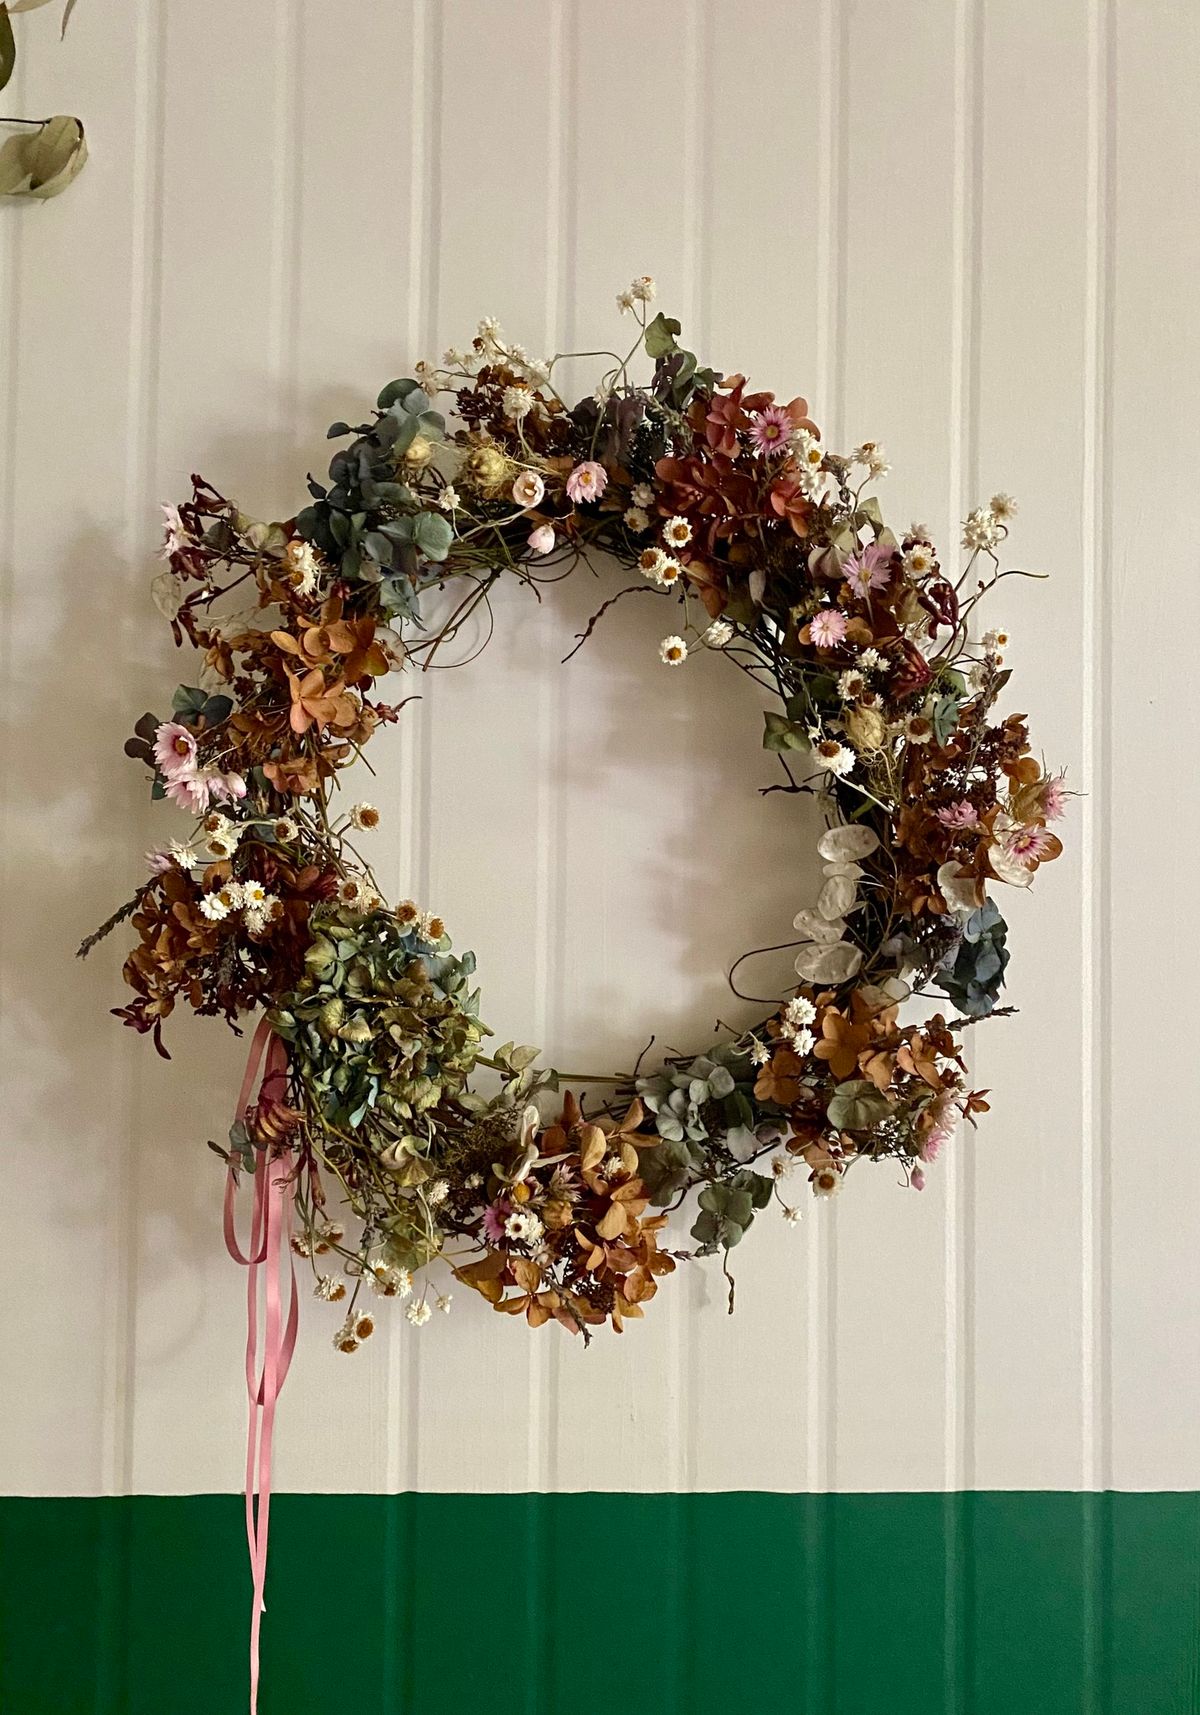 WINTER WREATH WORKSHOP  using dried flowers from our farm